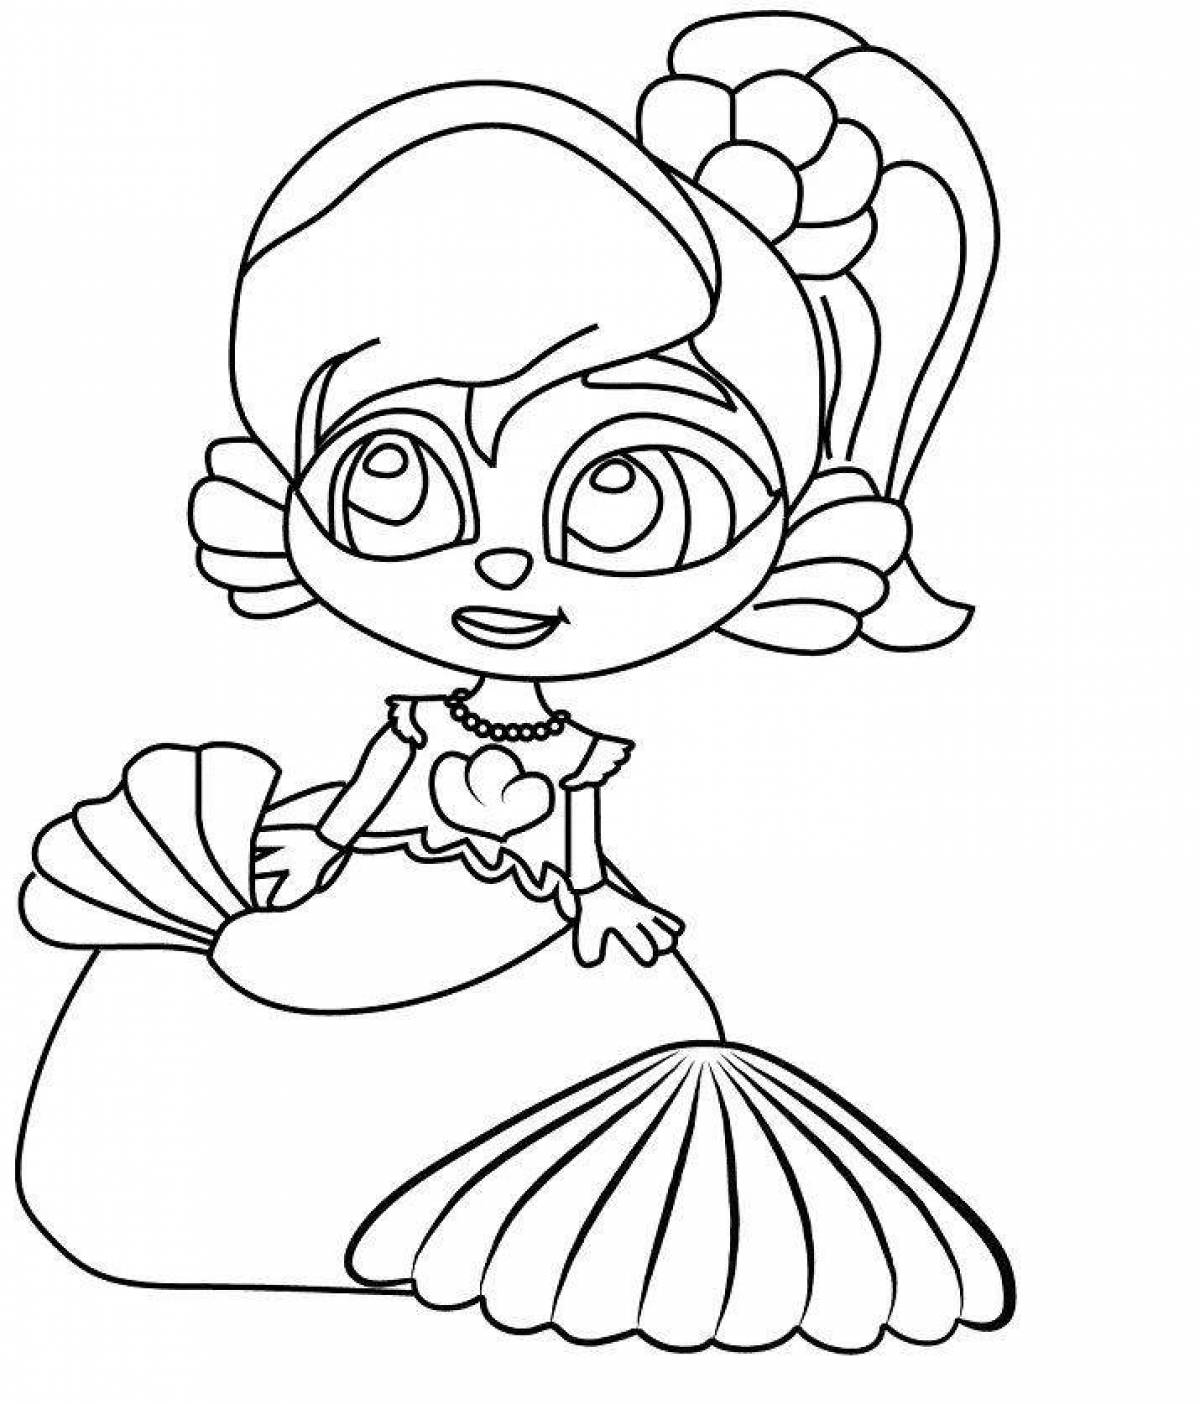 Amazing super monsters coloring pages